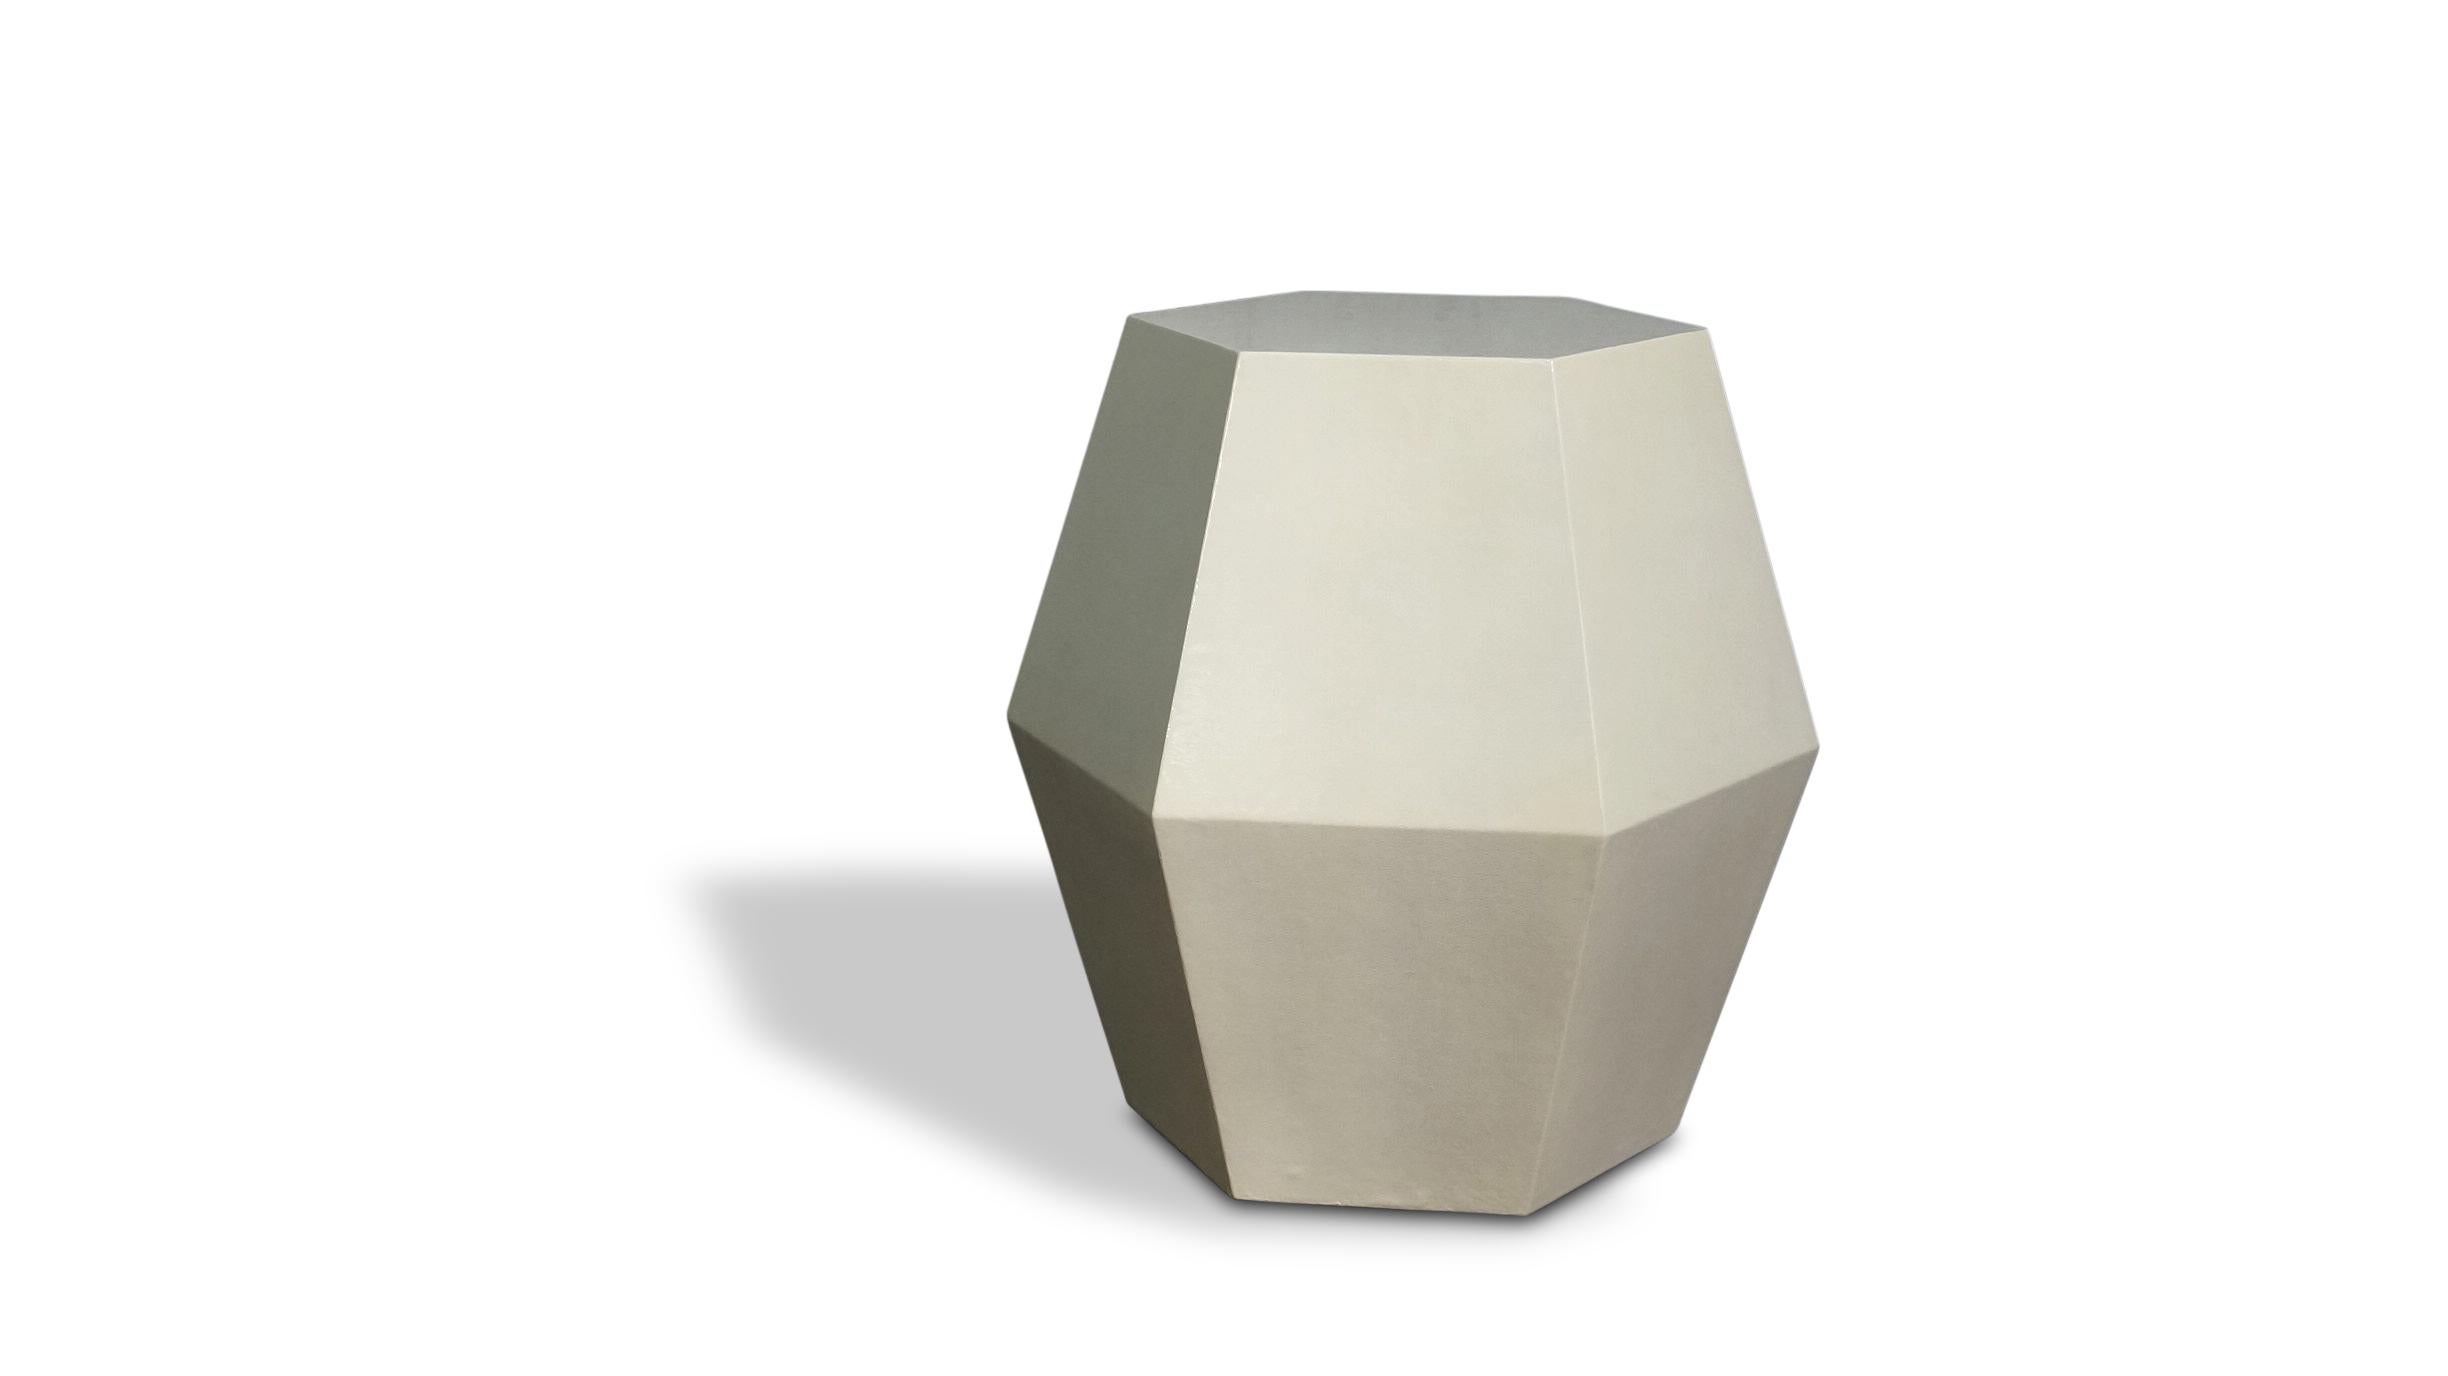 The name of the Tamino Hex comes from its hexagonal shape and can be specified in any of Costantini’s available materials and finishes. Available here in faux parchment, these side tables feature a modern, geometric shape that allows the subtle